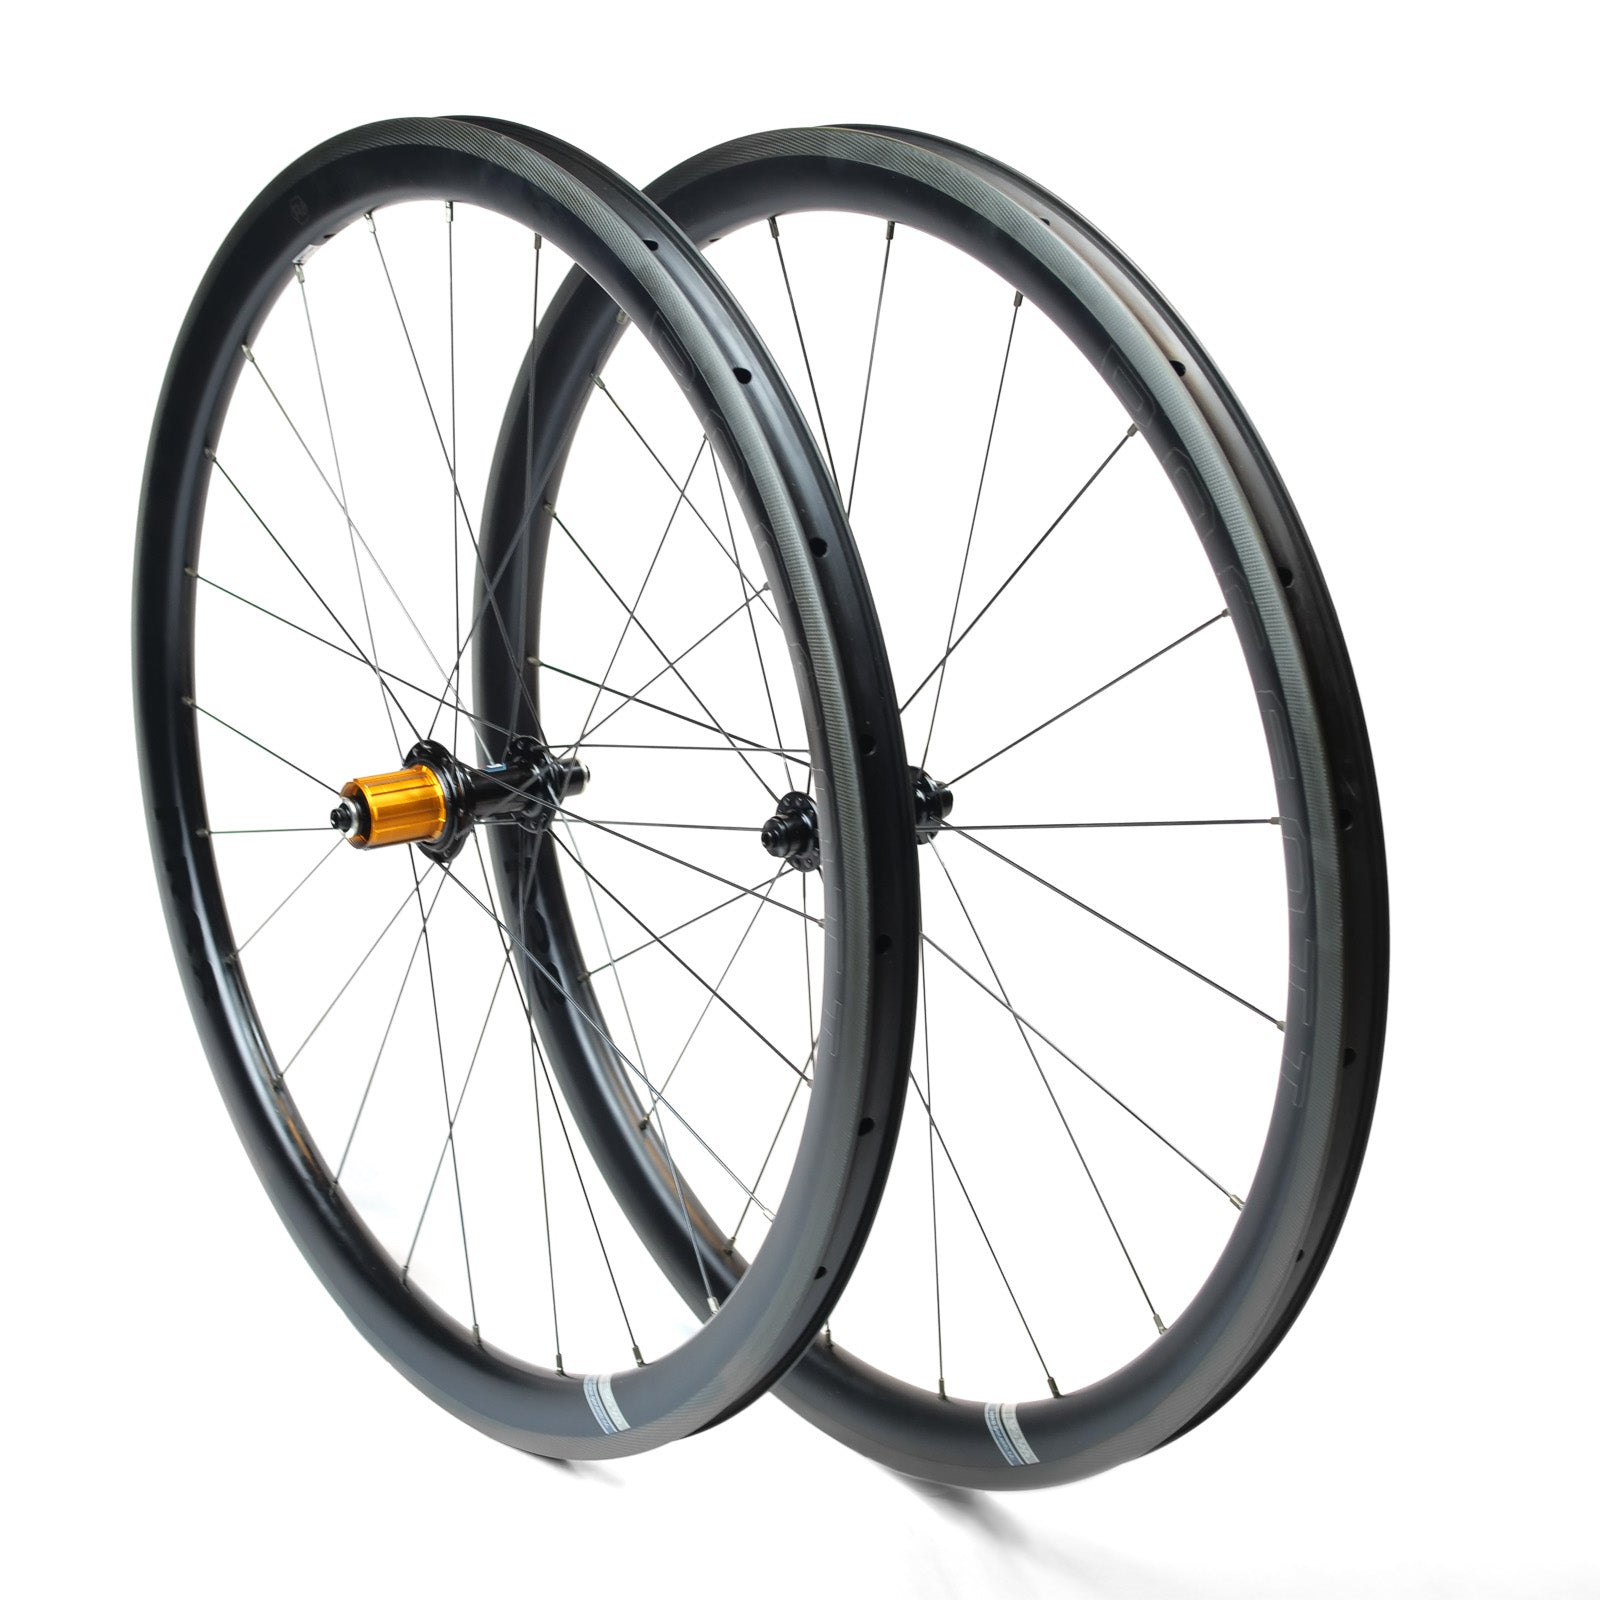 FORZA-C 30MM DISC CLINCHER WHEELS 700C SHIMANO – Pacenti Cycle Design